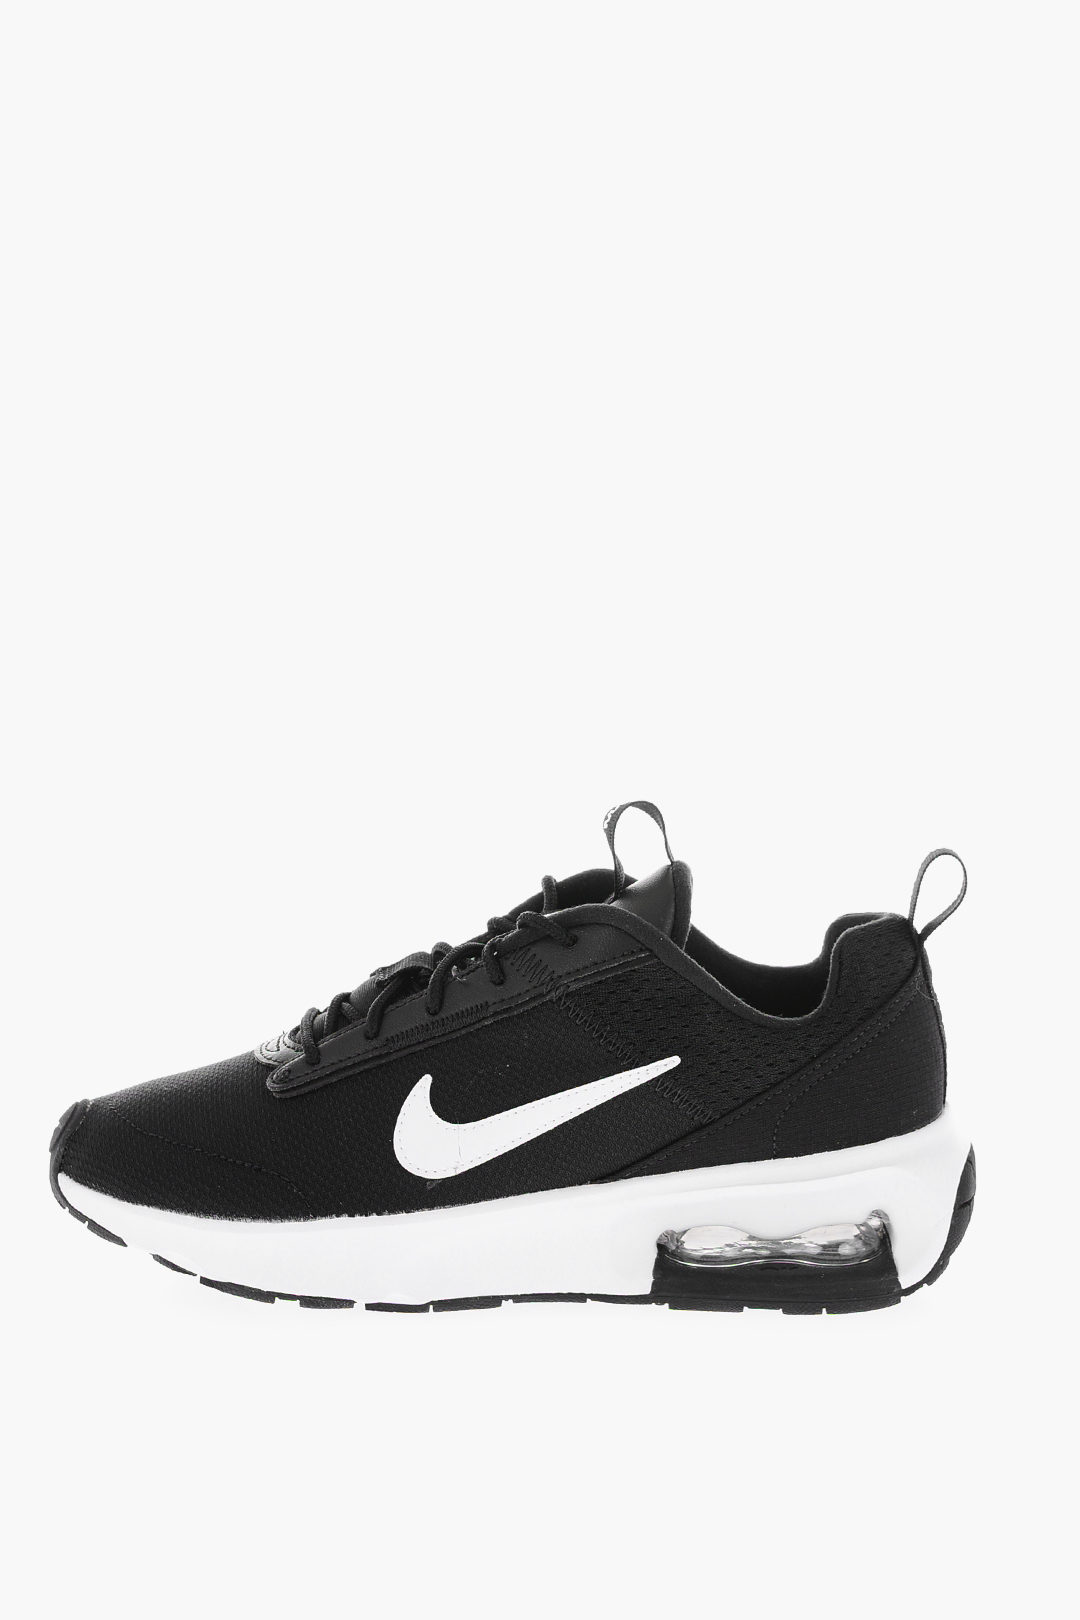 Verkeerd markering astronomie Nike Air Bubble Sole NIKE AIR MAX INTRLK LITE Low-Top Sneakers women -  Glamood Outlet